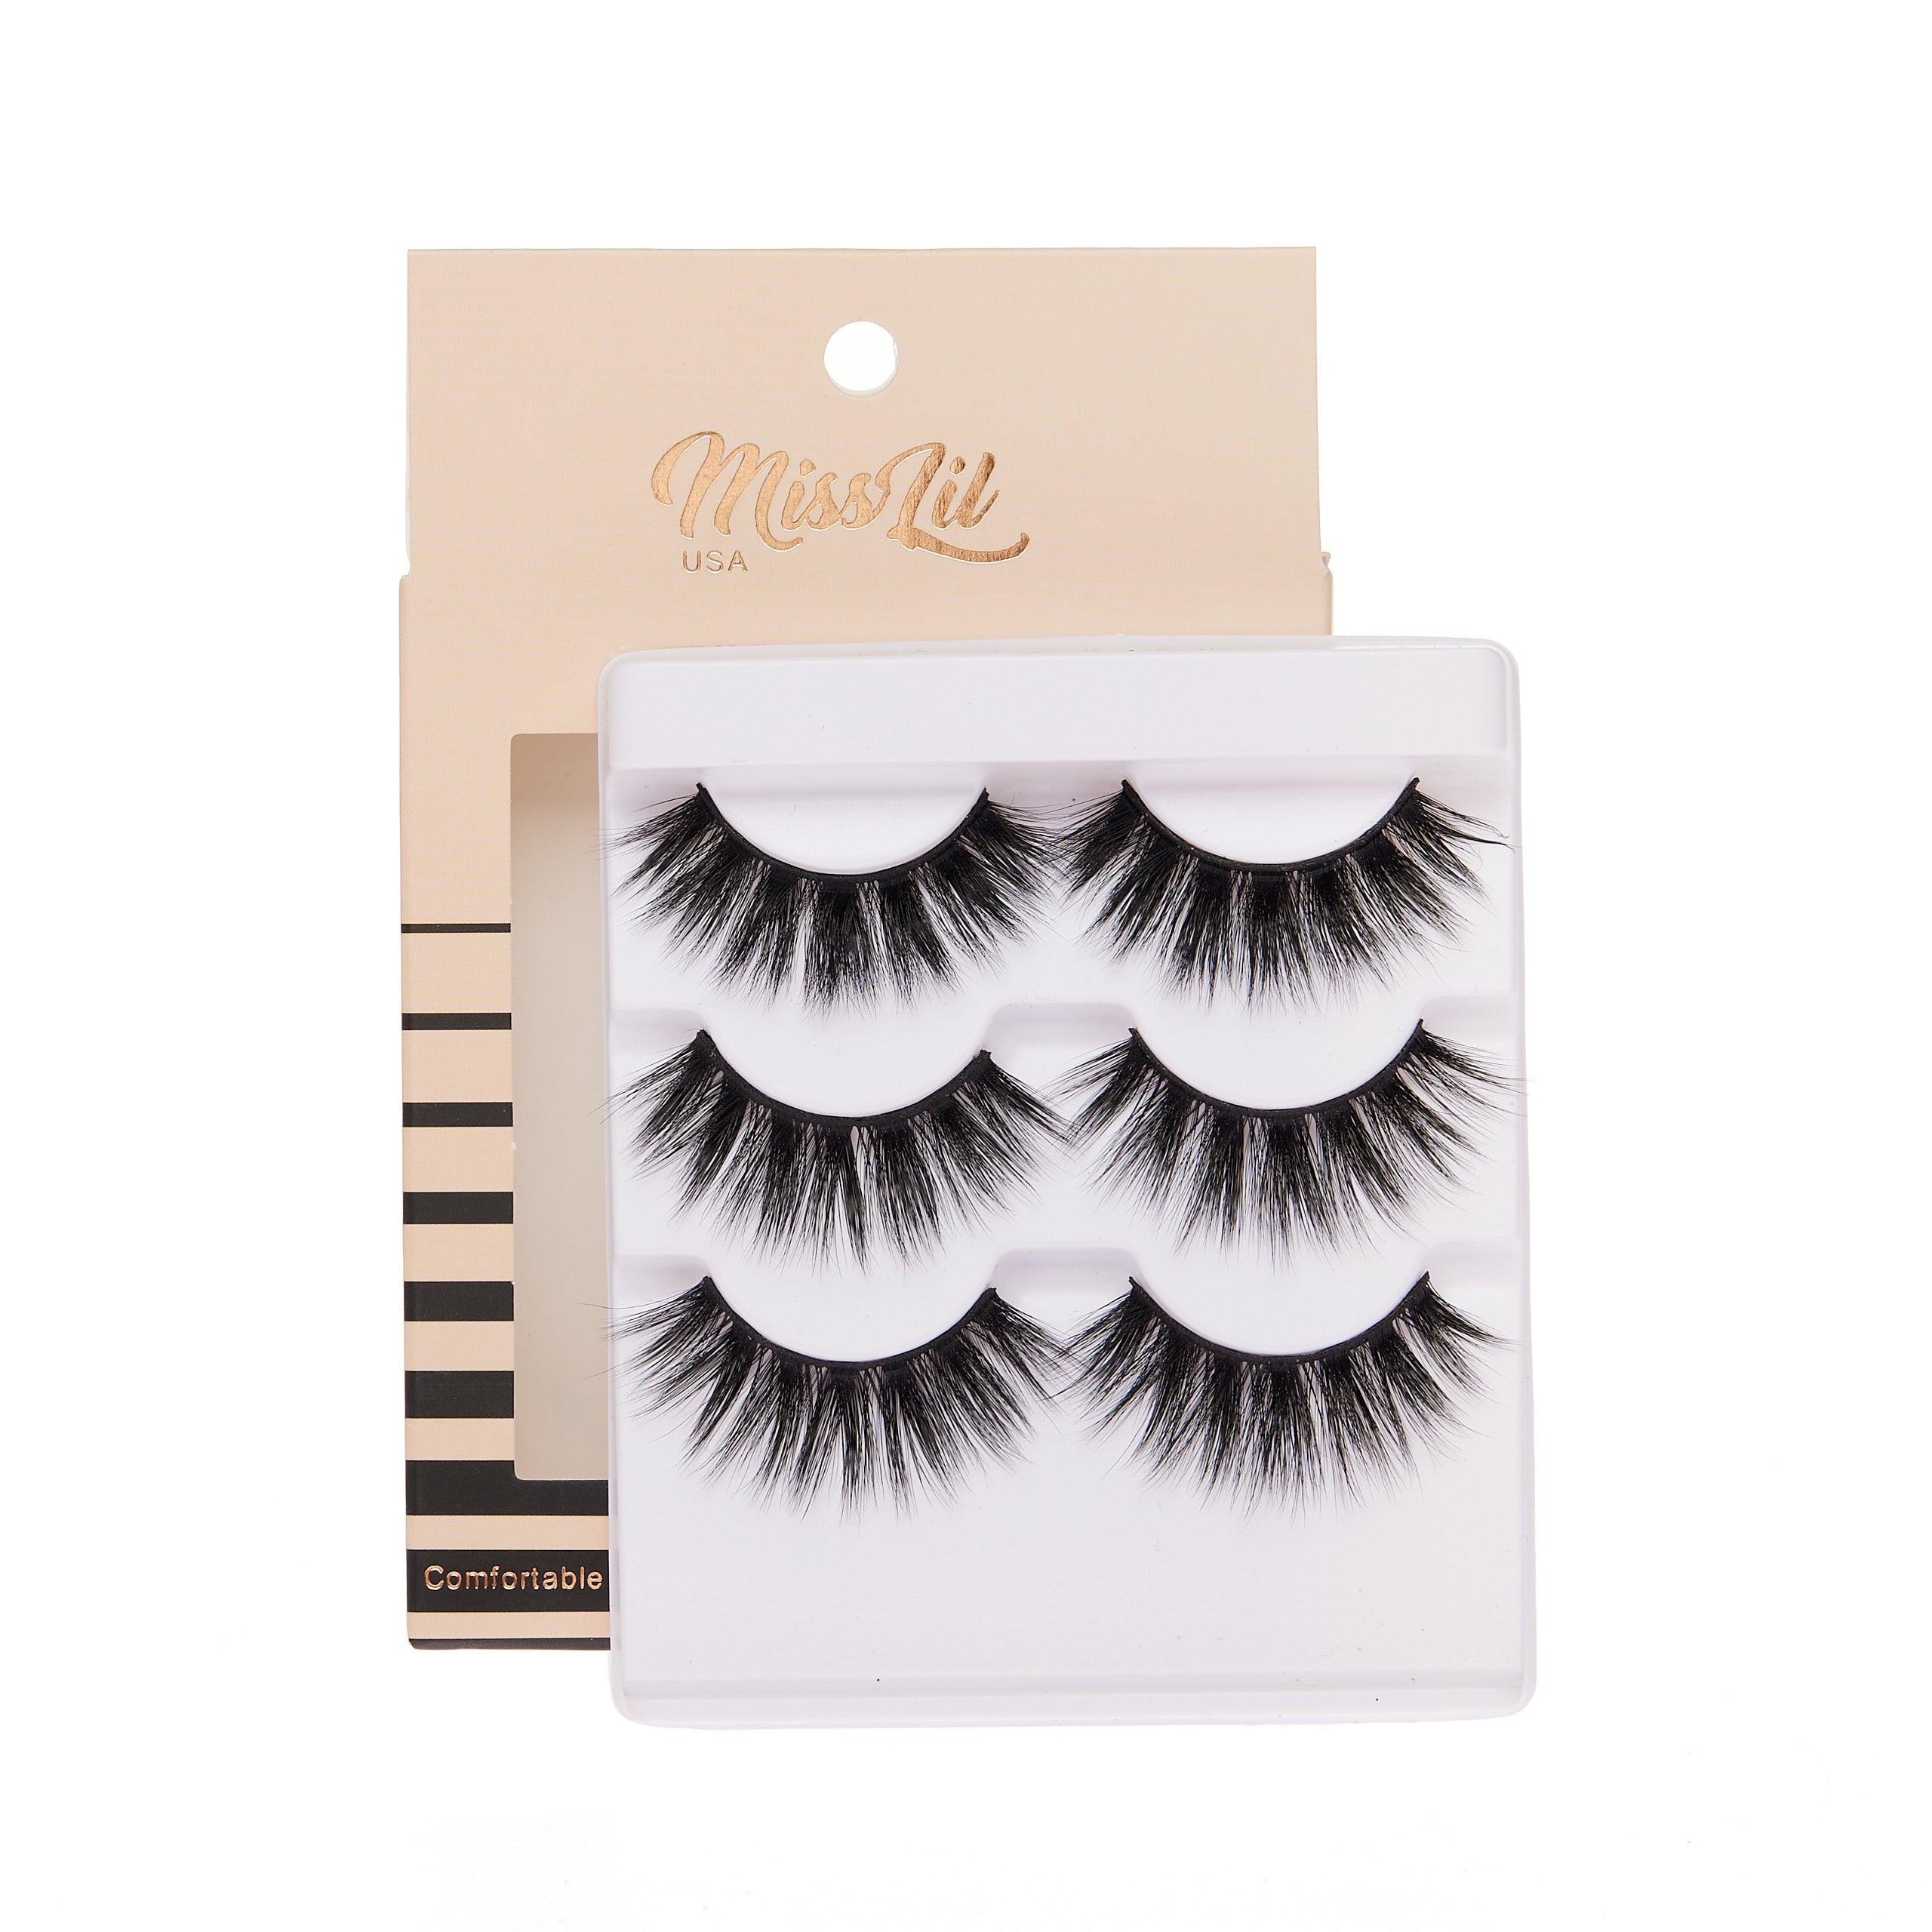 3-Pair Faux 9D Mink Eyelashes - Luxury Collection #15 - Pack of 12 - Miss Lil USA